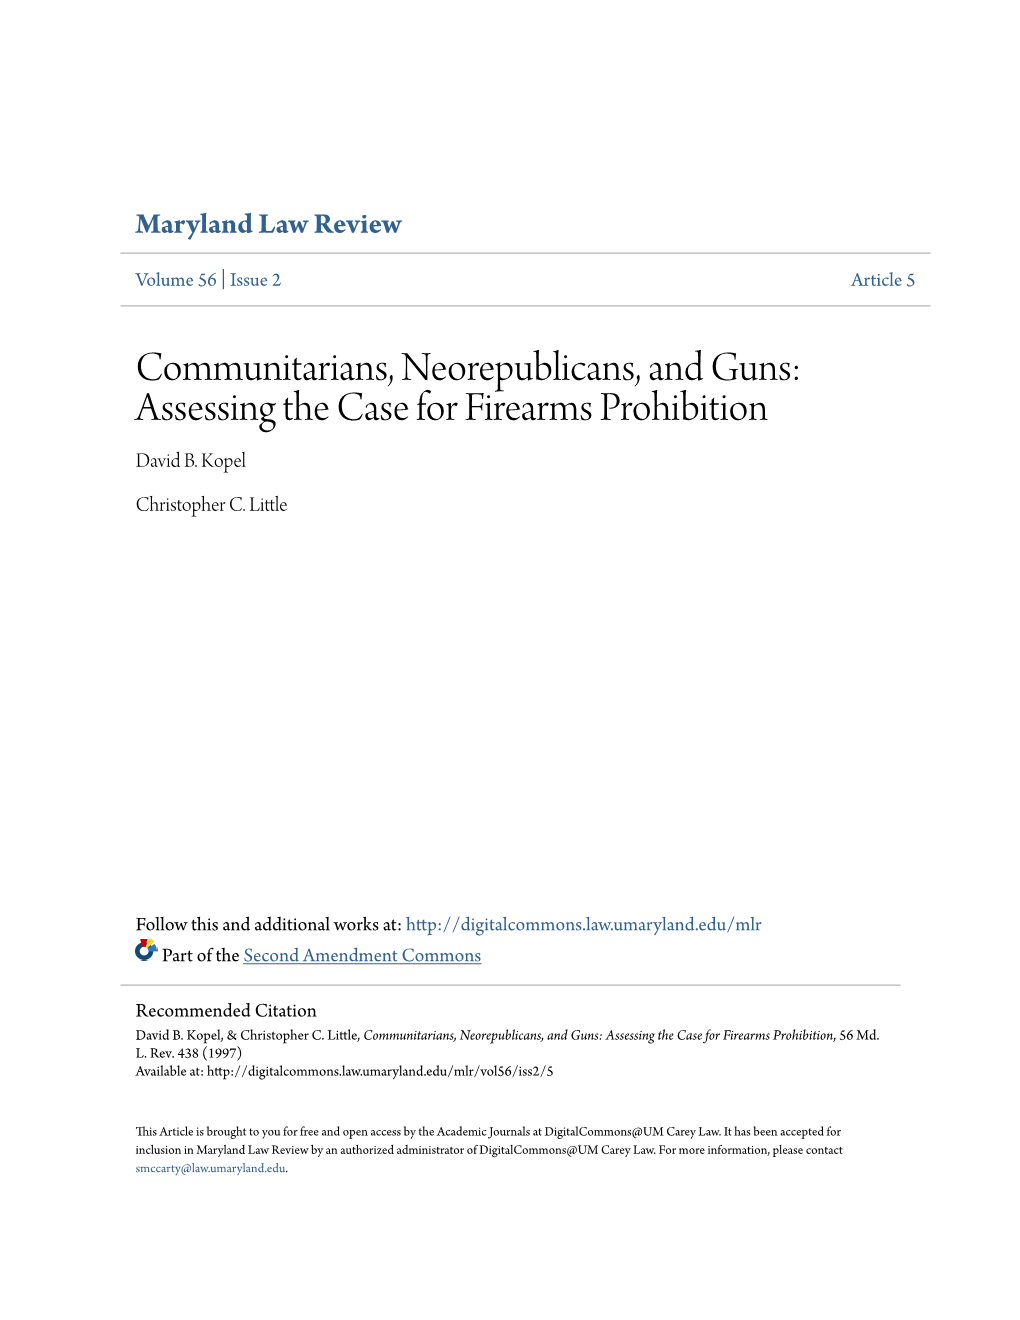 Communitarians, Neorepublicans, and Guns: Assessing the Case for Firearms Prohibition David B